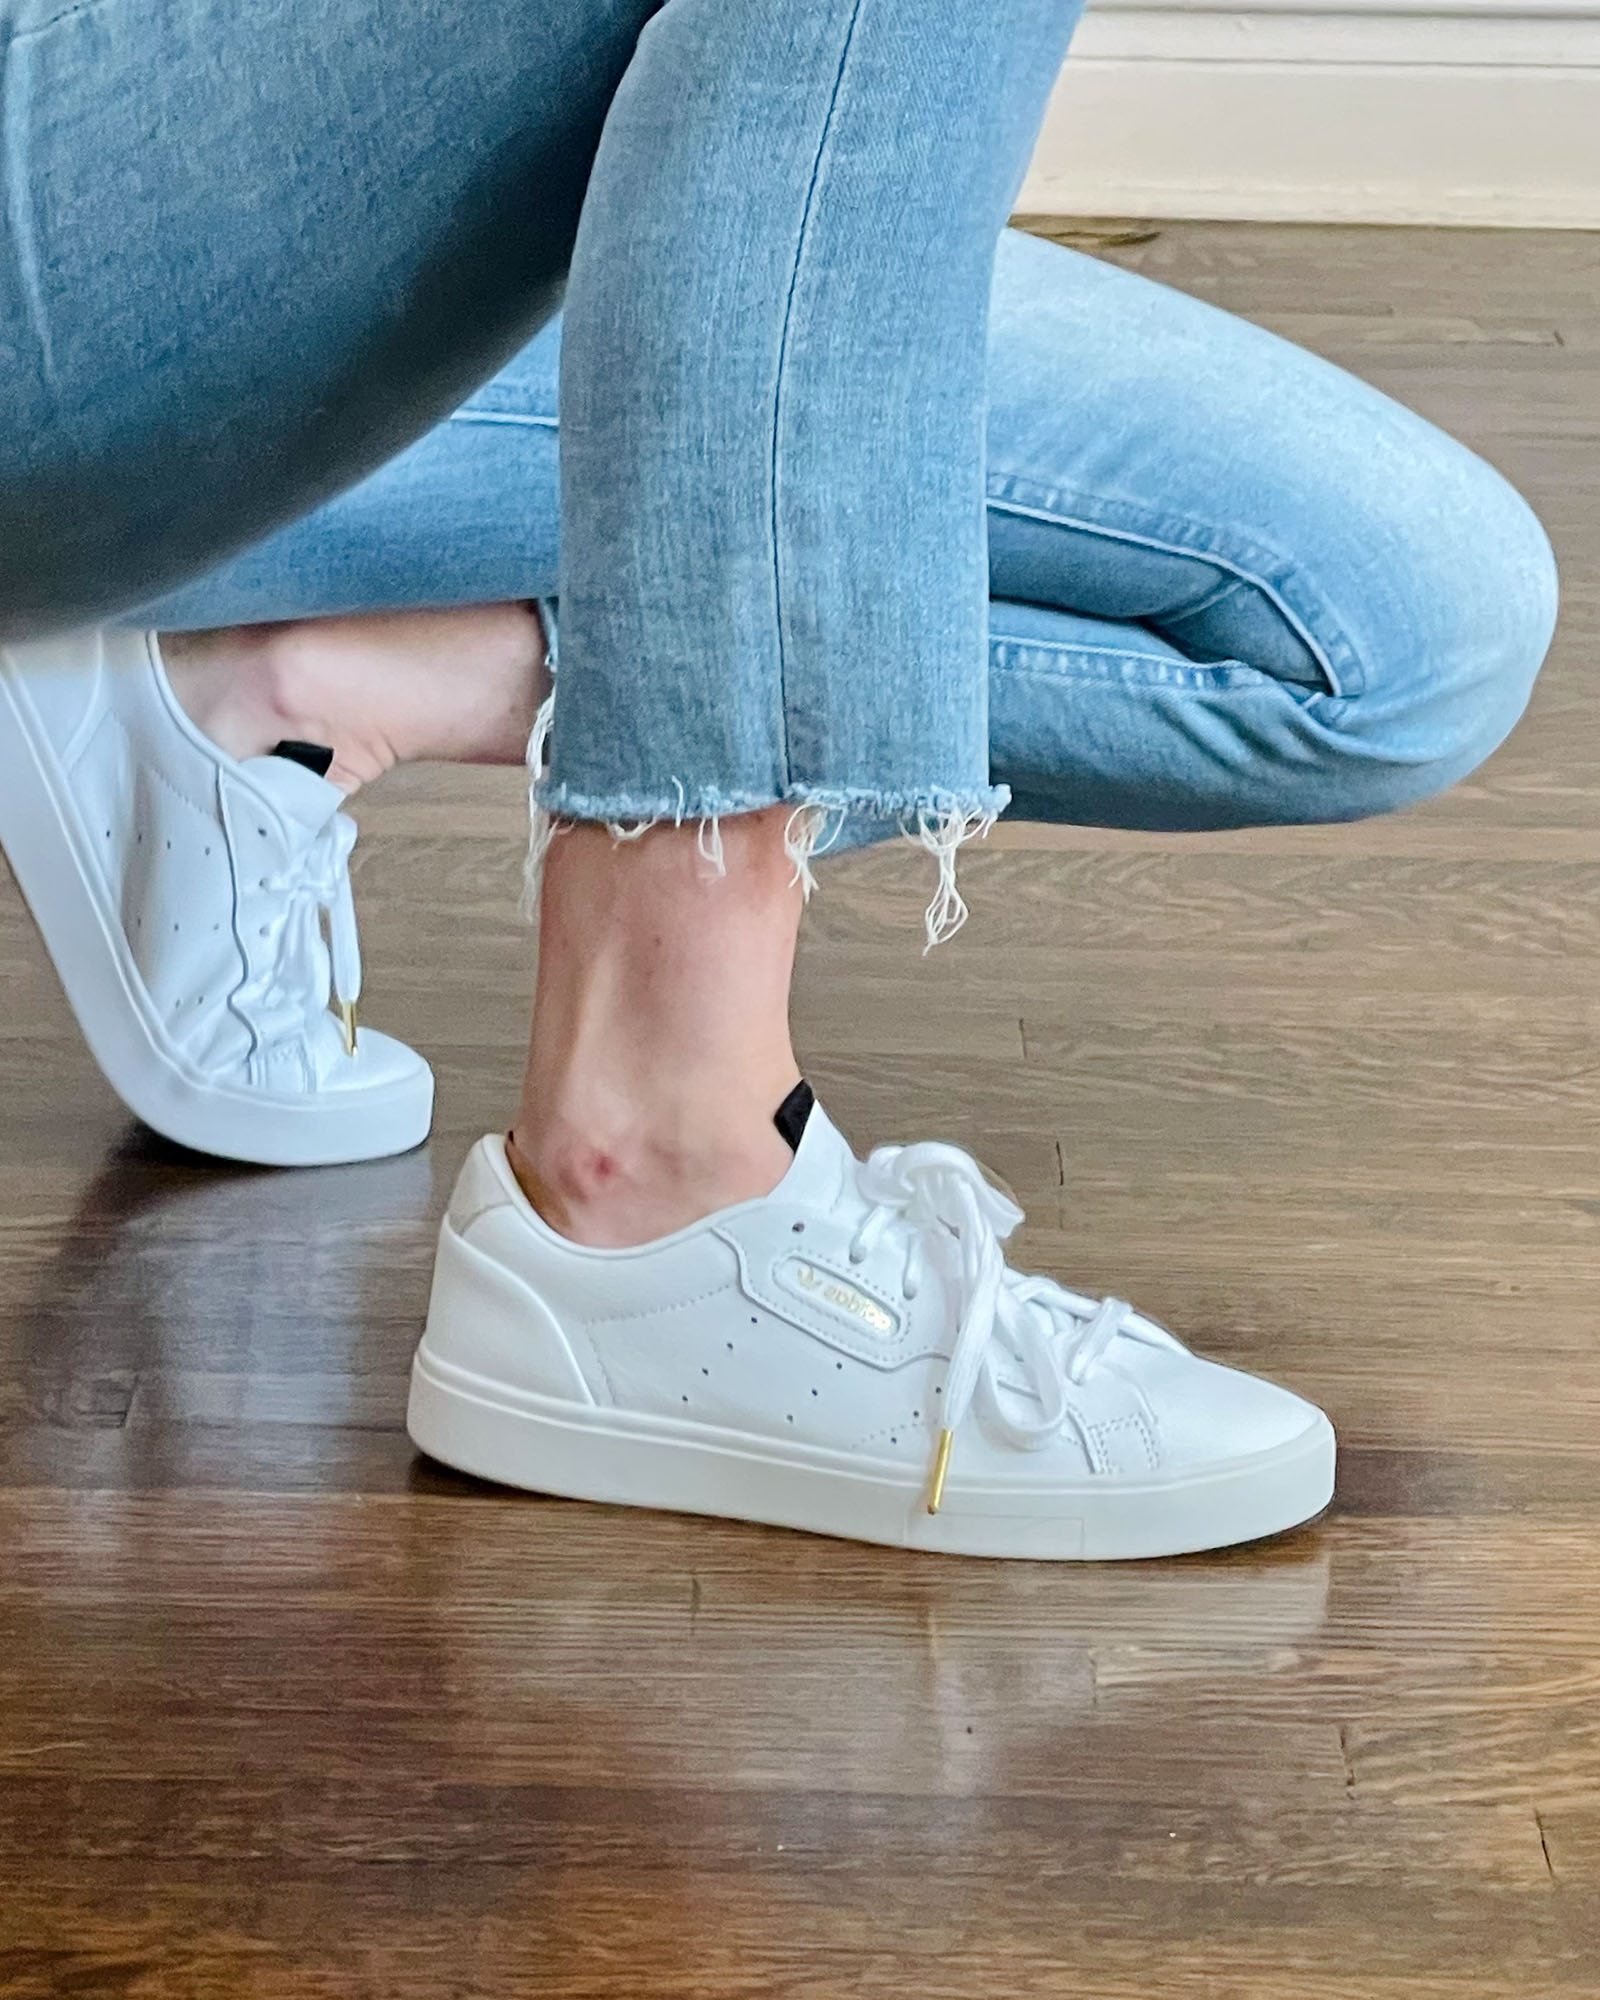 Our White Sneaker Round-Up: 6 Solid Pairs Reviewed